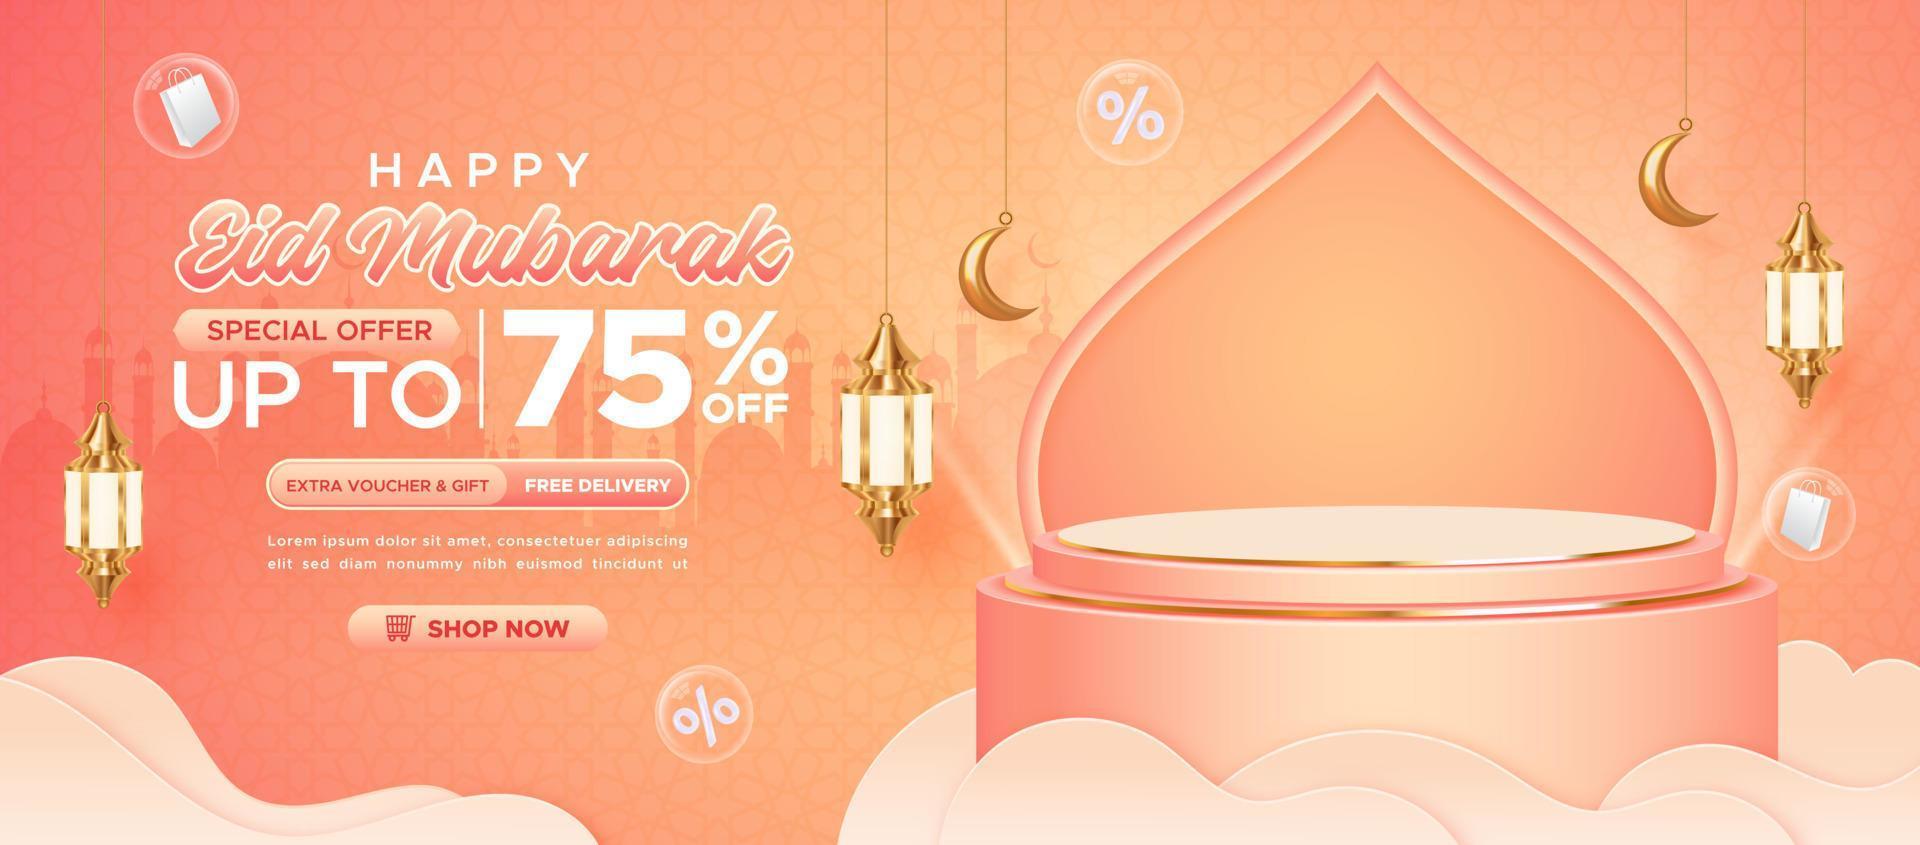 Eid mubarak sale promo banner template with patterns background vector